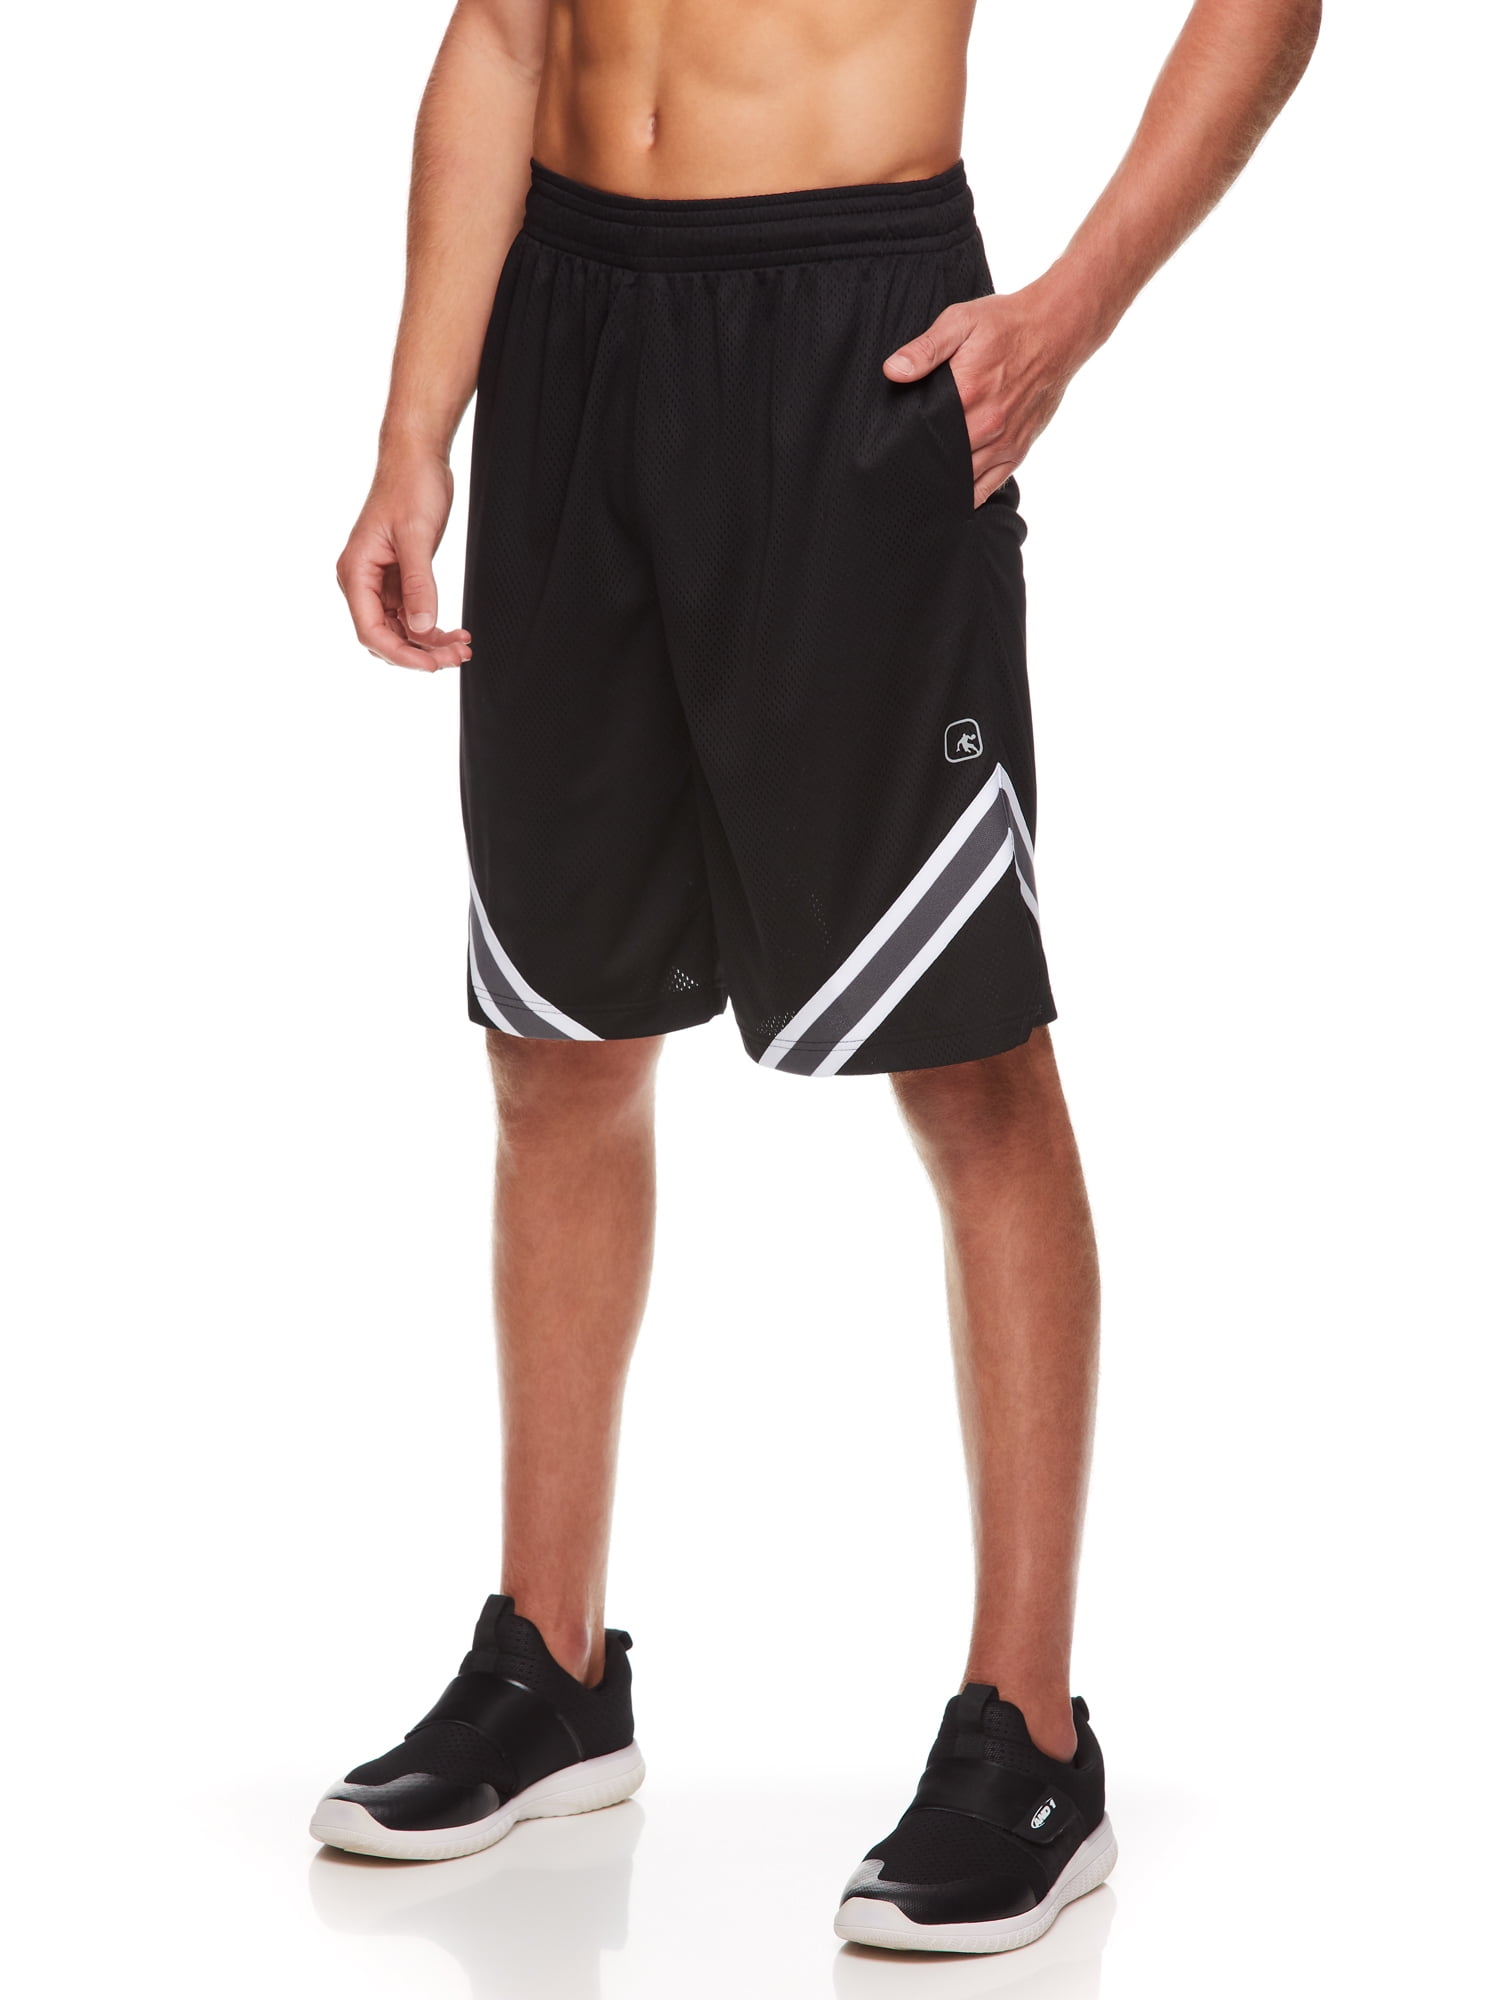 Details about   *** New Mens Basketball Shorts by And1.**Adjustable Elastic Waist Size S.***